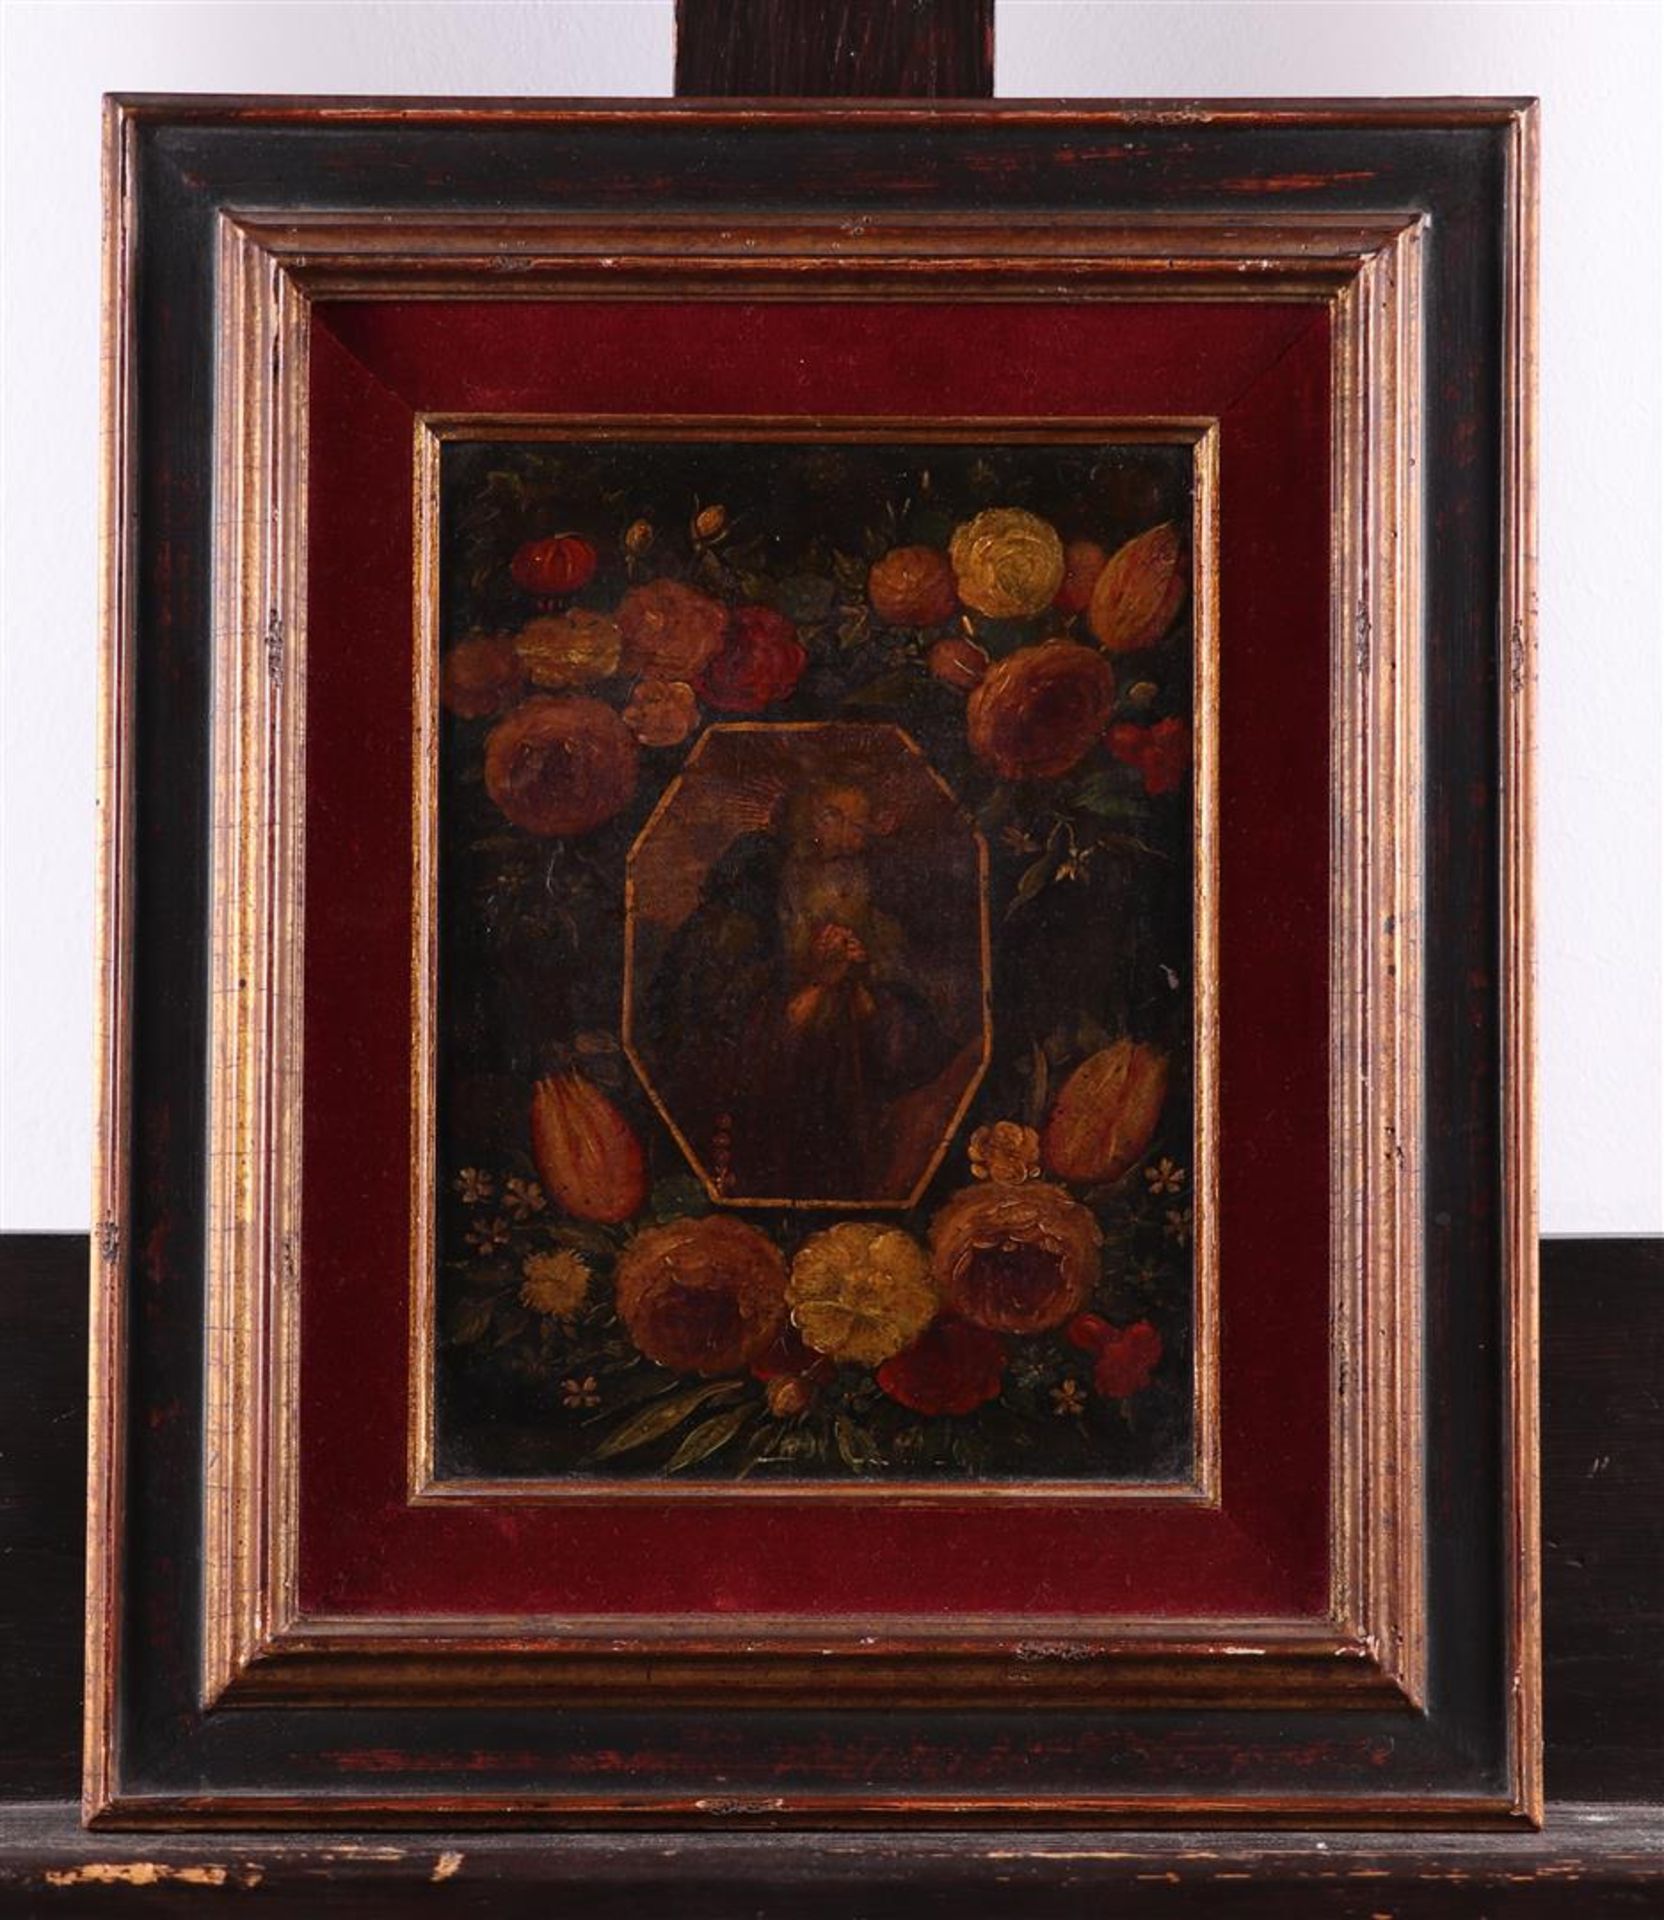 Flemish School, ca. 1800, The apostle Jacobus Maior (?)surrounded by a garland of flowers, oil on co - Image 2 of 3